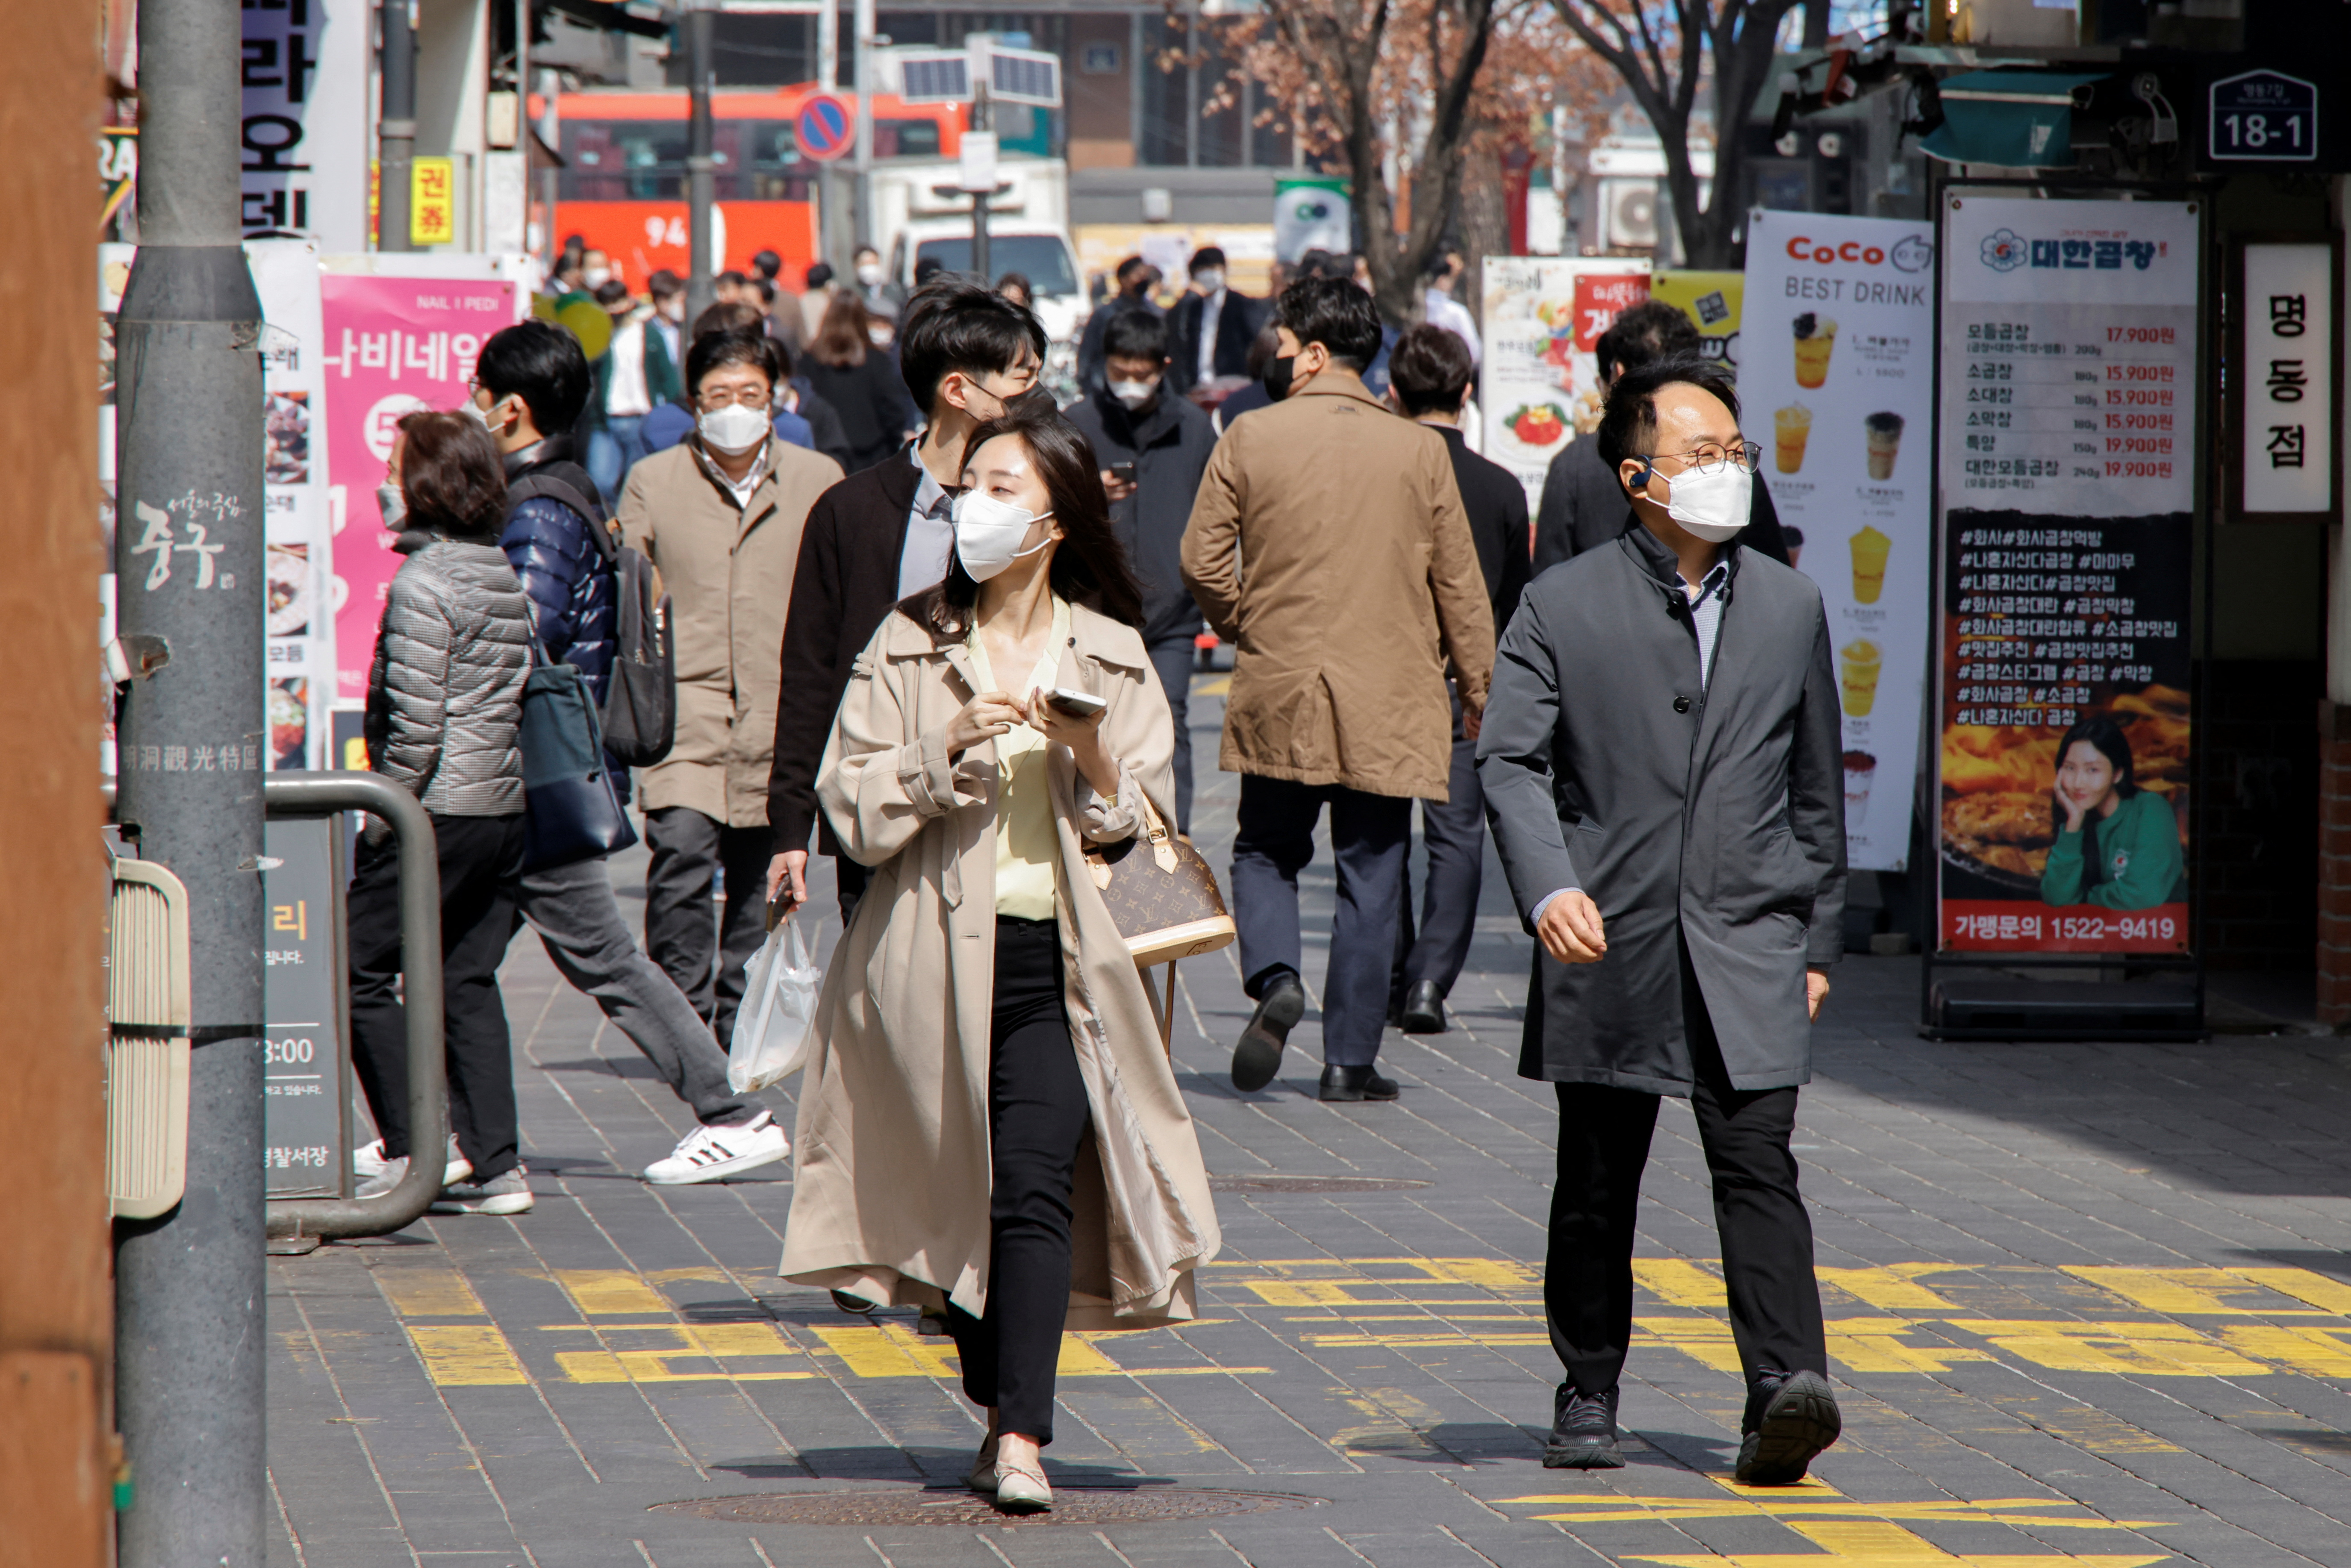 People wearing masks walk in a shopping district amid the coronavirus disease (COVID-19) pandemic in Seoul